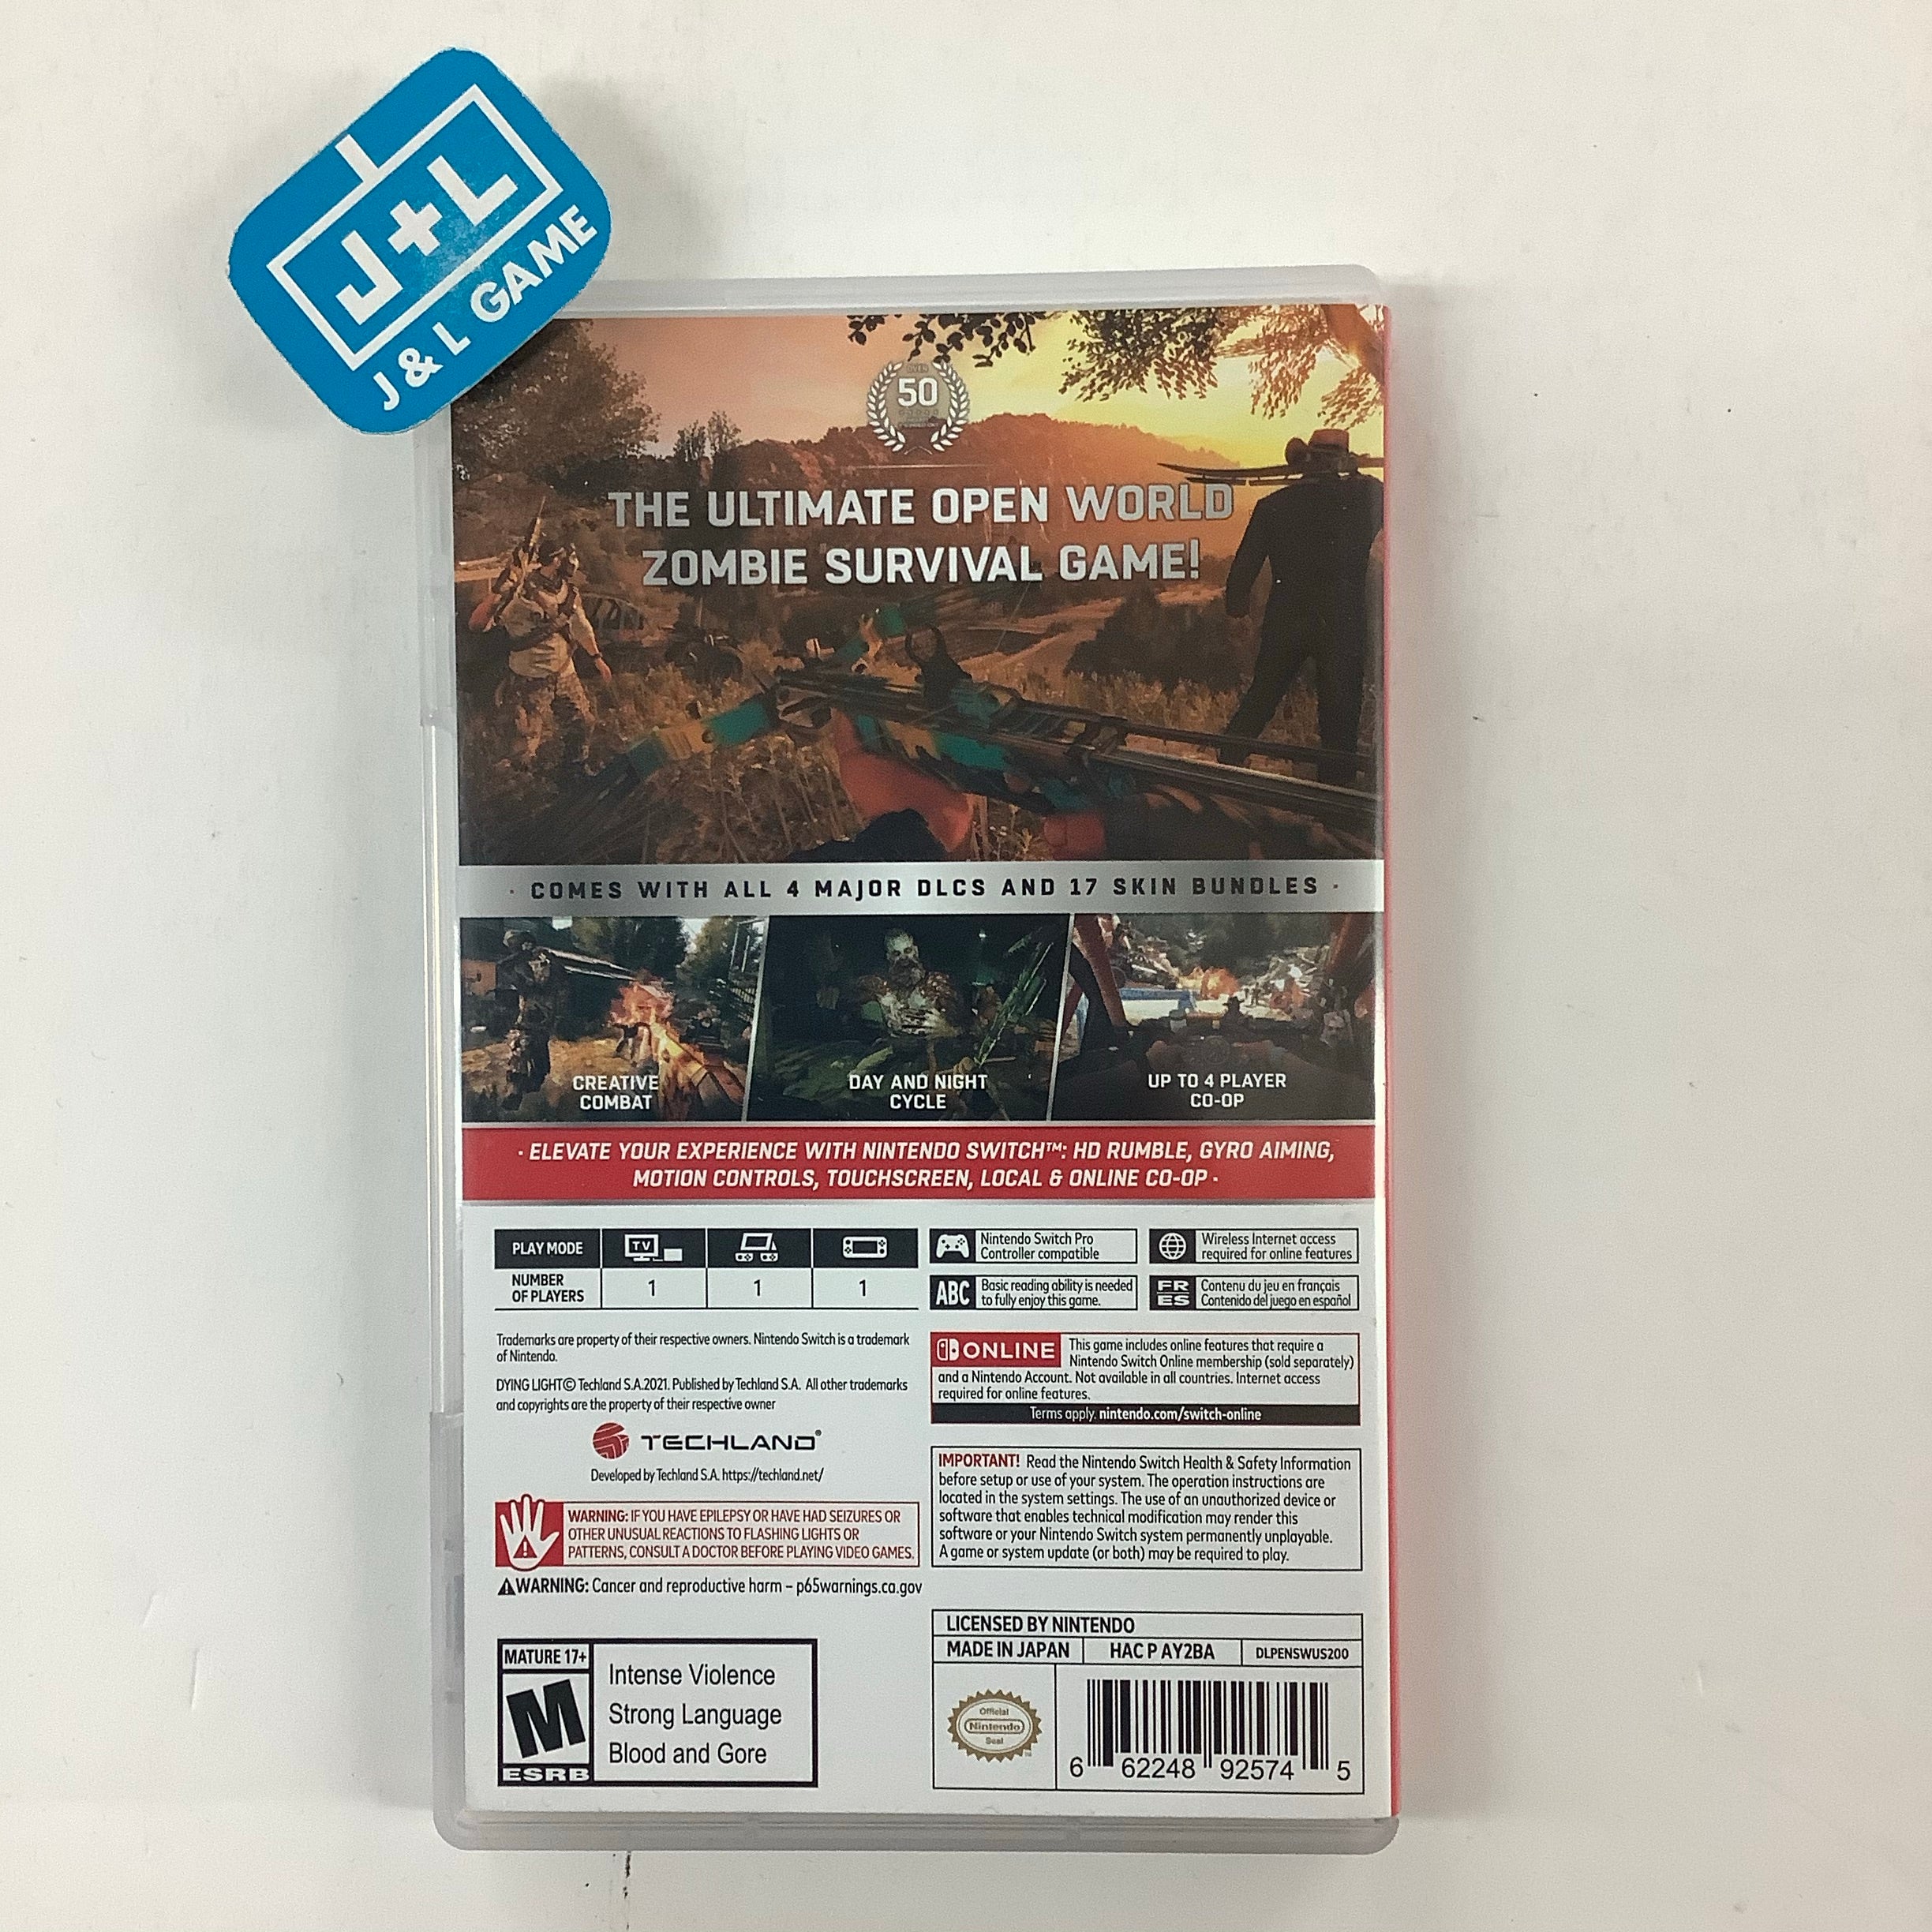 Dying Light: Platinum Edition - (NSW) Nintendo Switch [Pre-Owned] Video Games Techland   